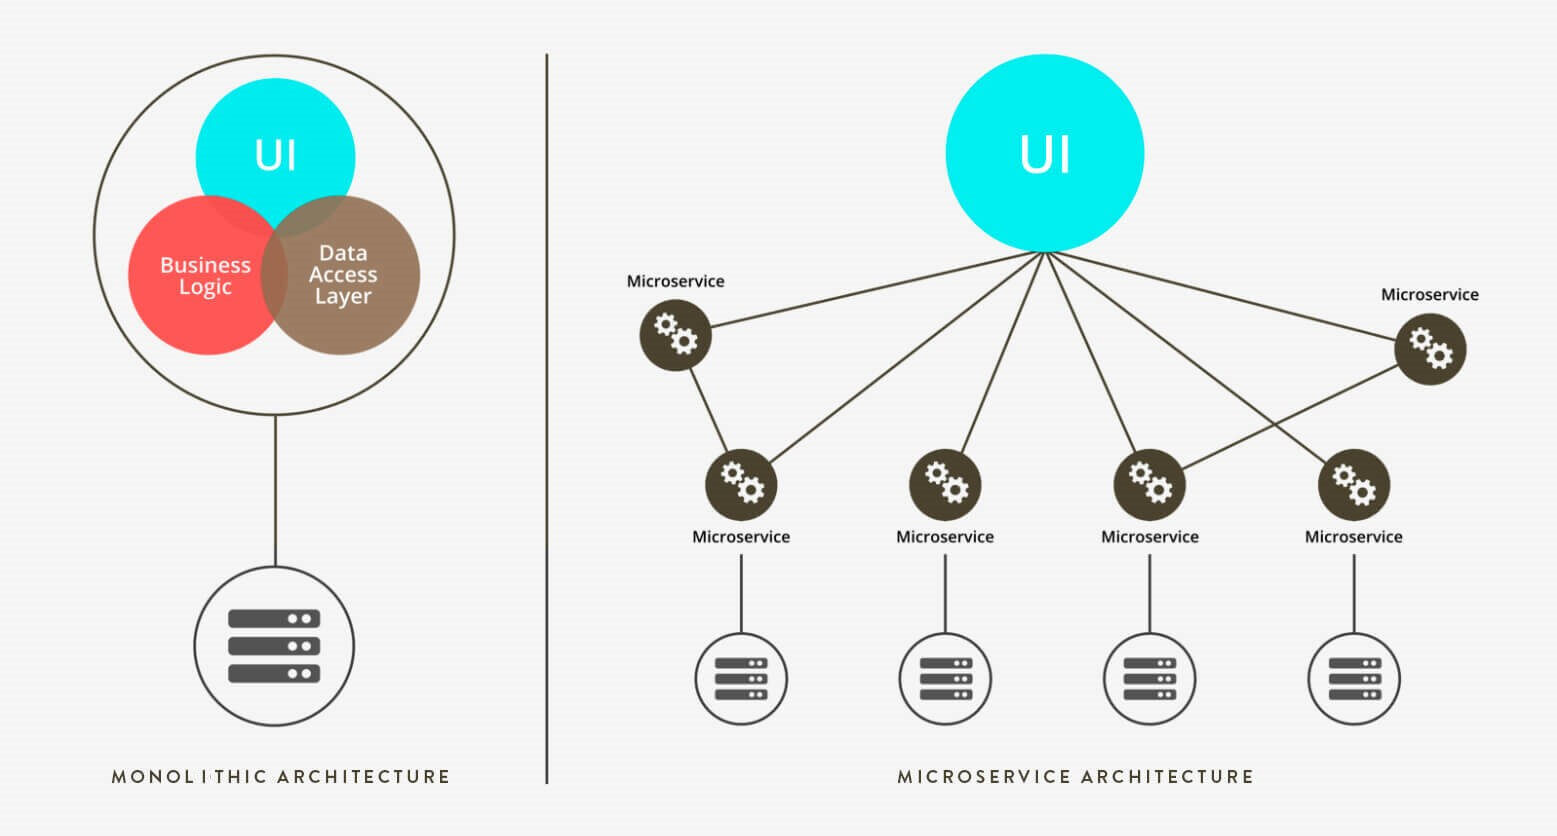 How Microservices Architecture differs from Monolithic one